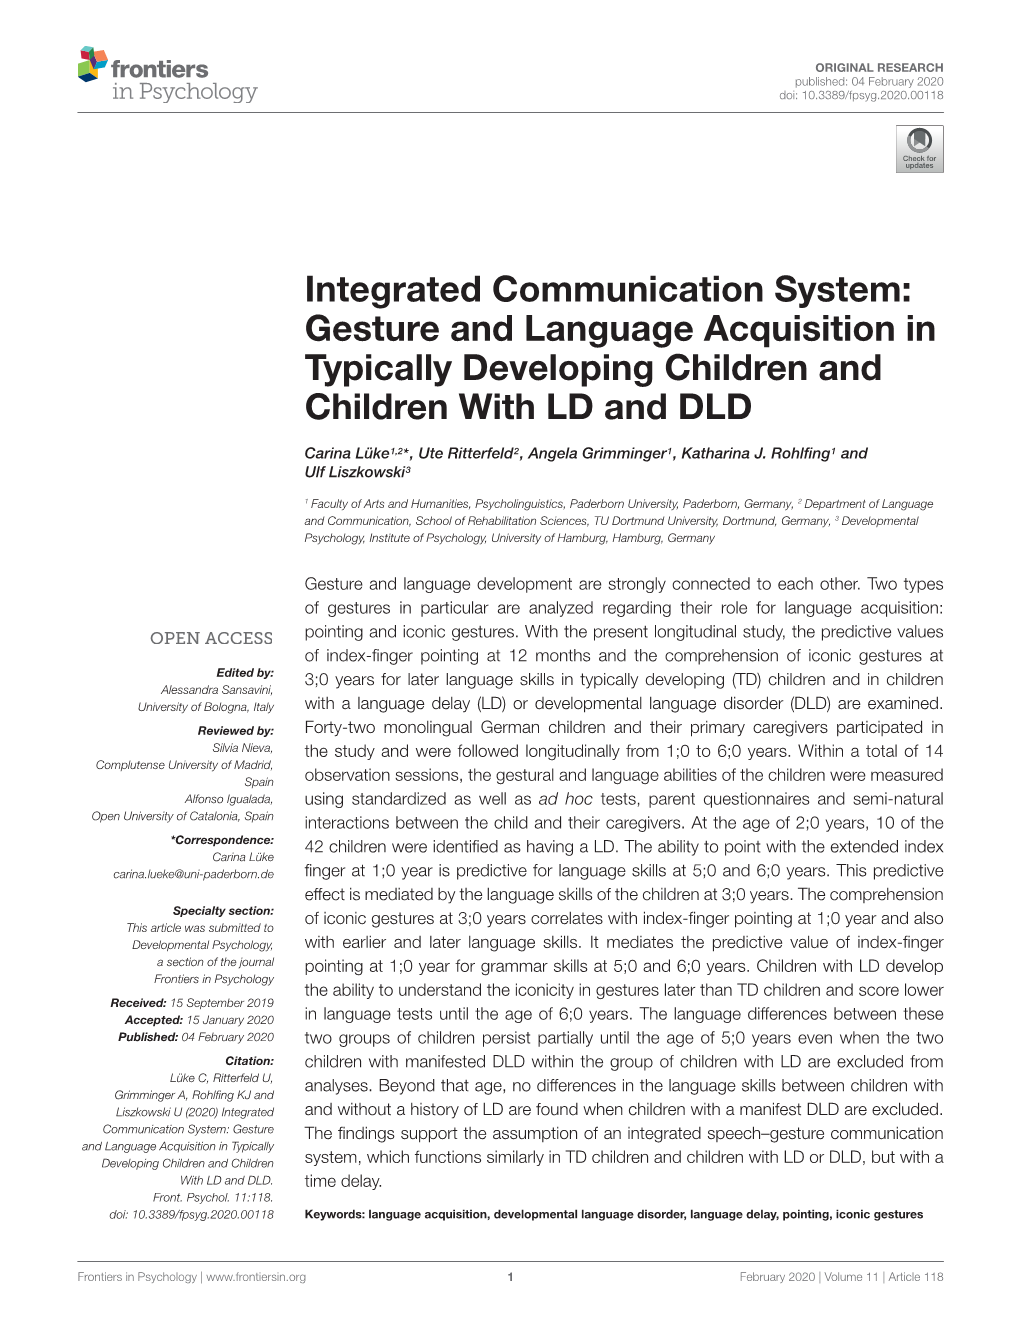 Gesture and Language Acquisition in Typically Developing Children and Children with LD and DLD